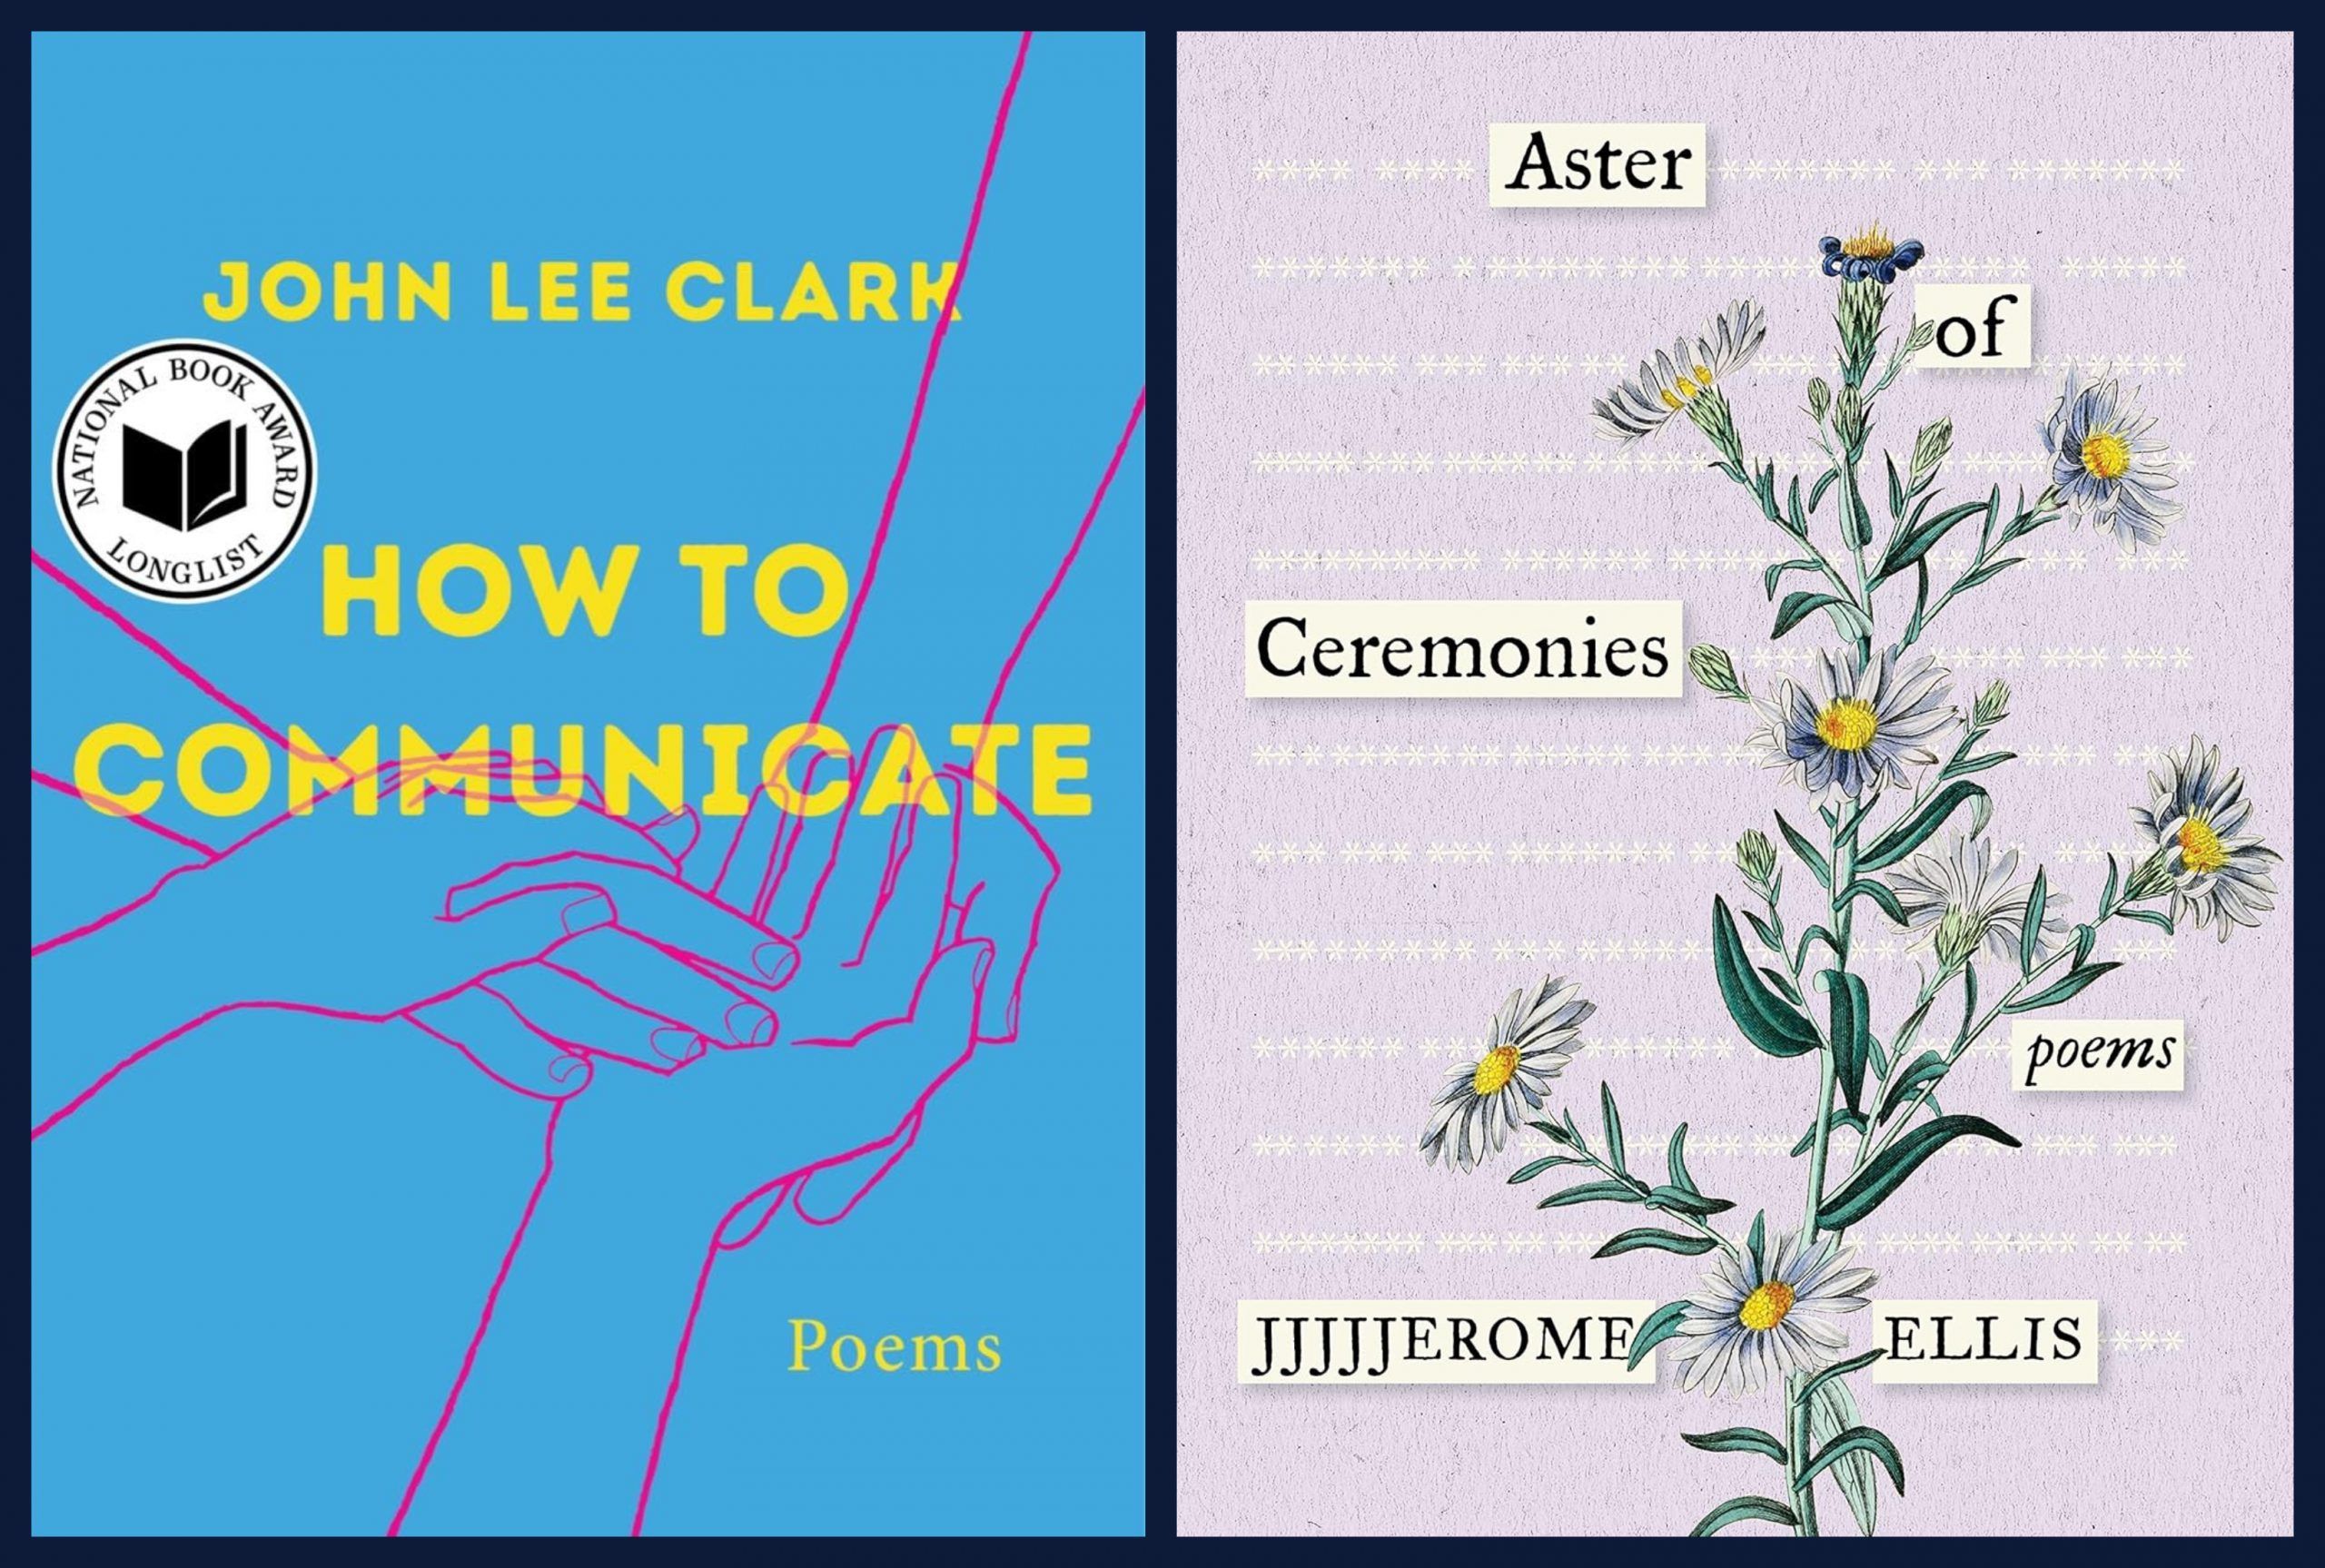 Instruments of Unknowing: On John Lee Clark’s “How to Communicate” and JJJJJerome Ellis’s “Aster of Ceremonies”